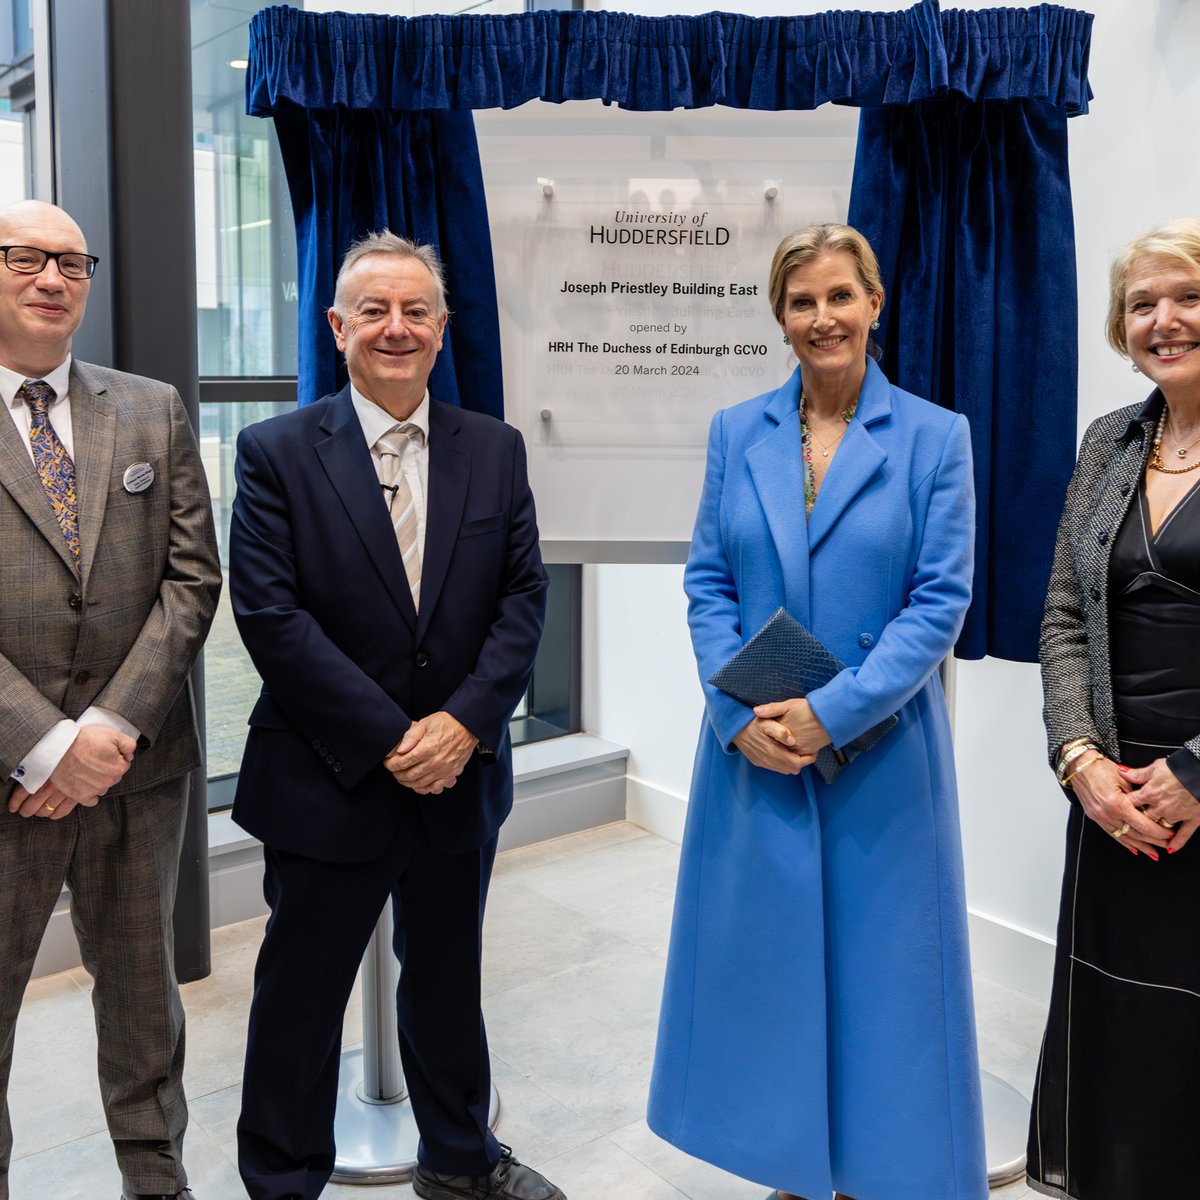 Valli Opticians, a leading provider of eye and hearing care in Huddersfield, is thrilled to announce a special event - a visit from Her Royal Highness The Duchess of Edinburgh. The University of Huddersfield organised this prestigious visit, which included the official openin ...